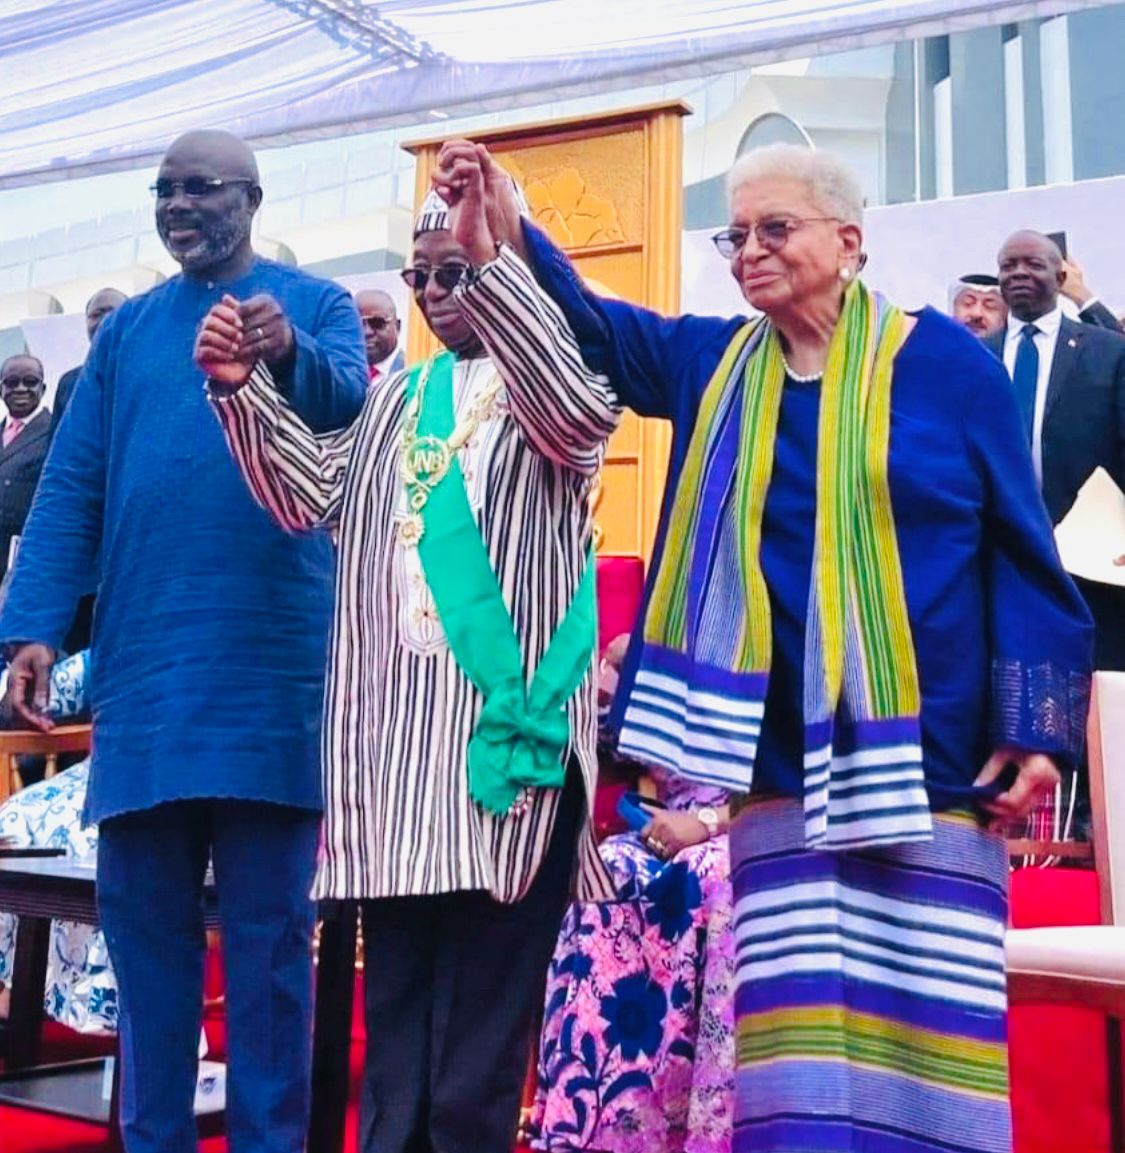 In absence of any living former president,at what political cost would have #Uhuru & @RailaOdinga incurred to usher in president elect @WilliamsRuto?Outgoing president #GeorgeWeah was courteous to join former president #ElenJohnsonSirleaf in ushering president elect #JosephBoakai